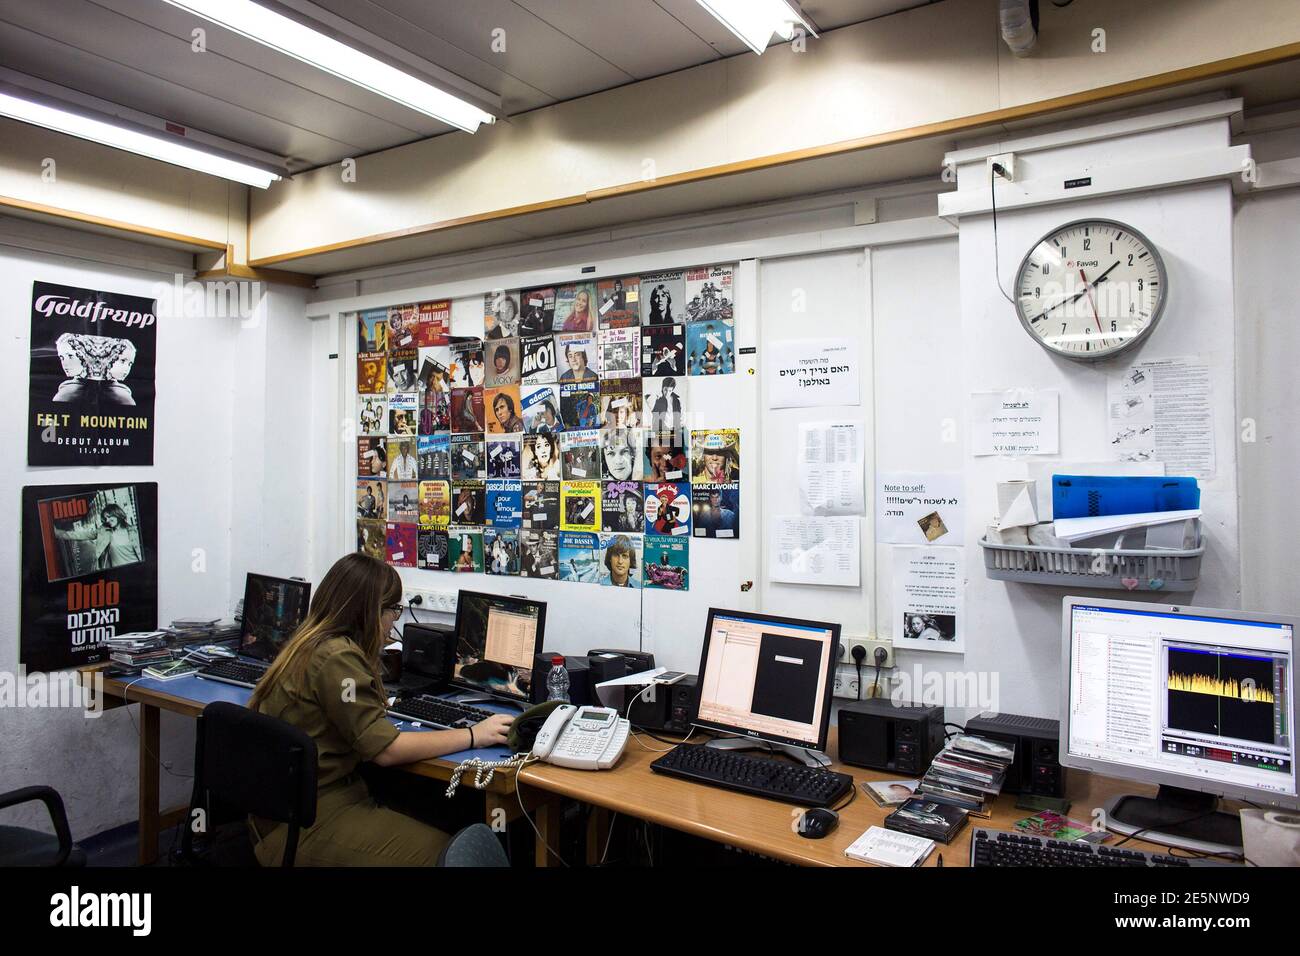 An Israeli soldier from Galei Tzahal, the Israeli army radio station, sits  in front of a computer as she edits music at the station's studios in  Jaffa, south of central Tel Aviv